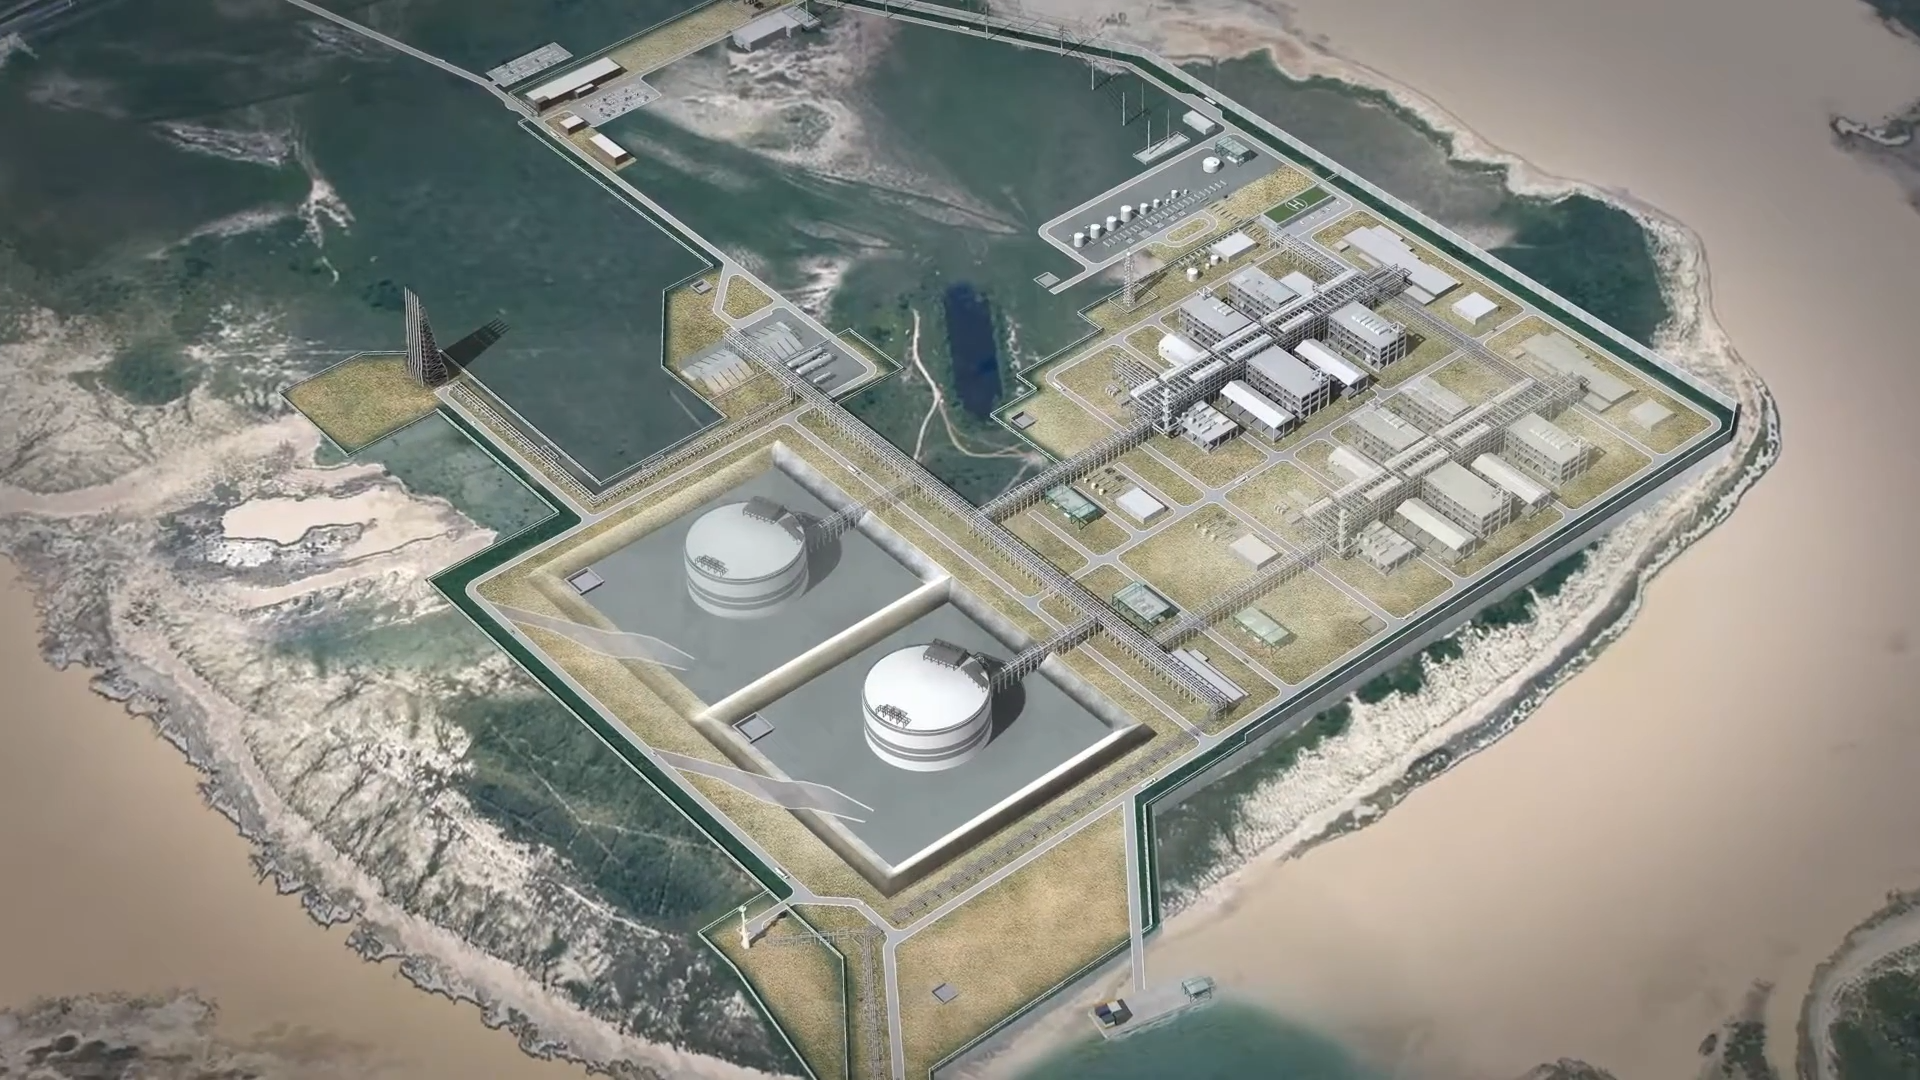 Texas LNG secures Brownsville site